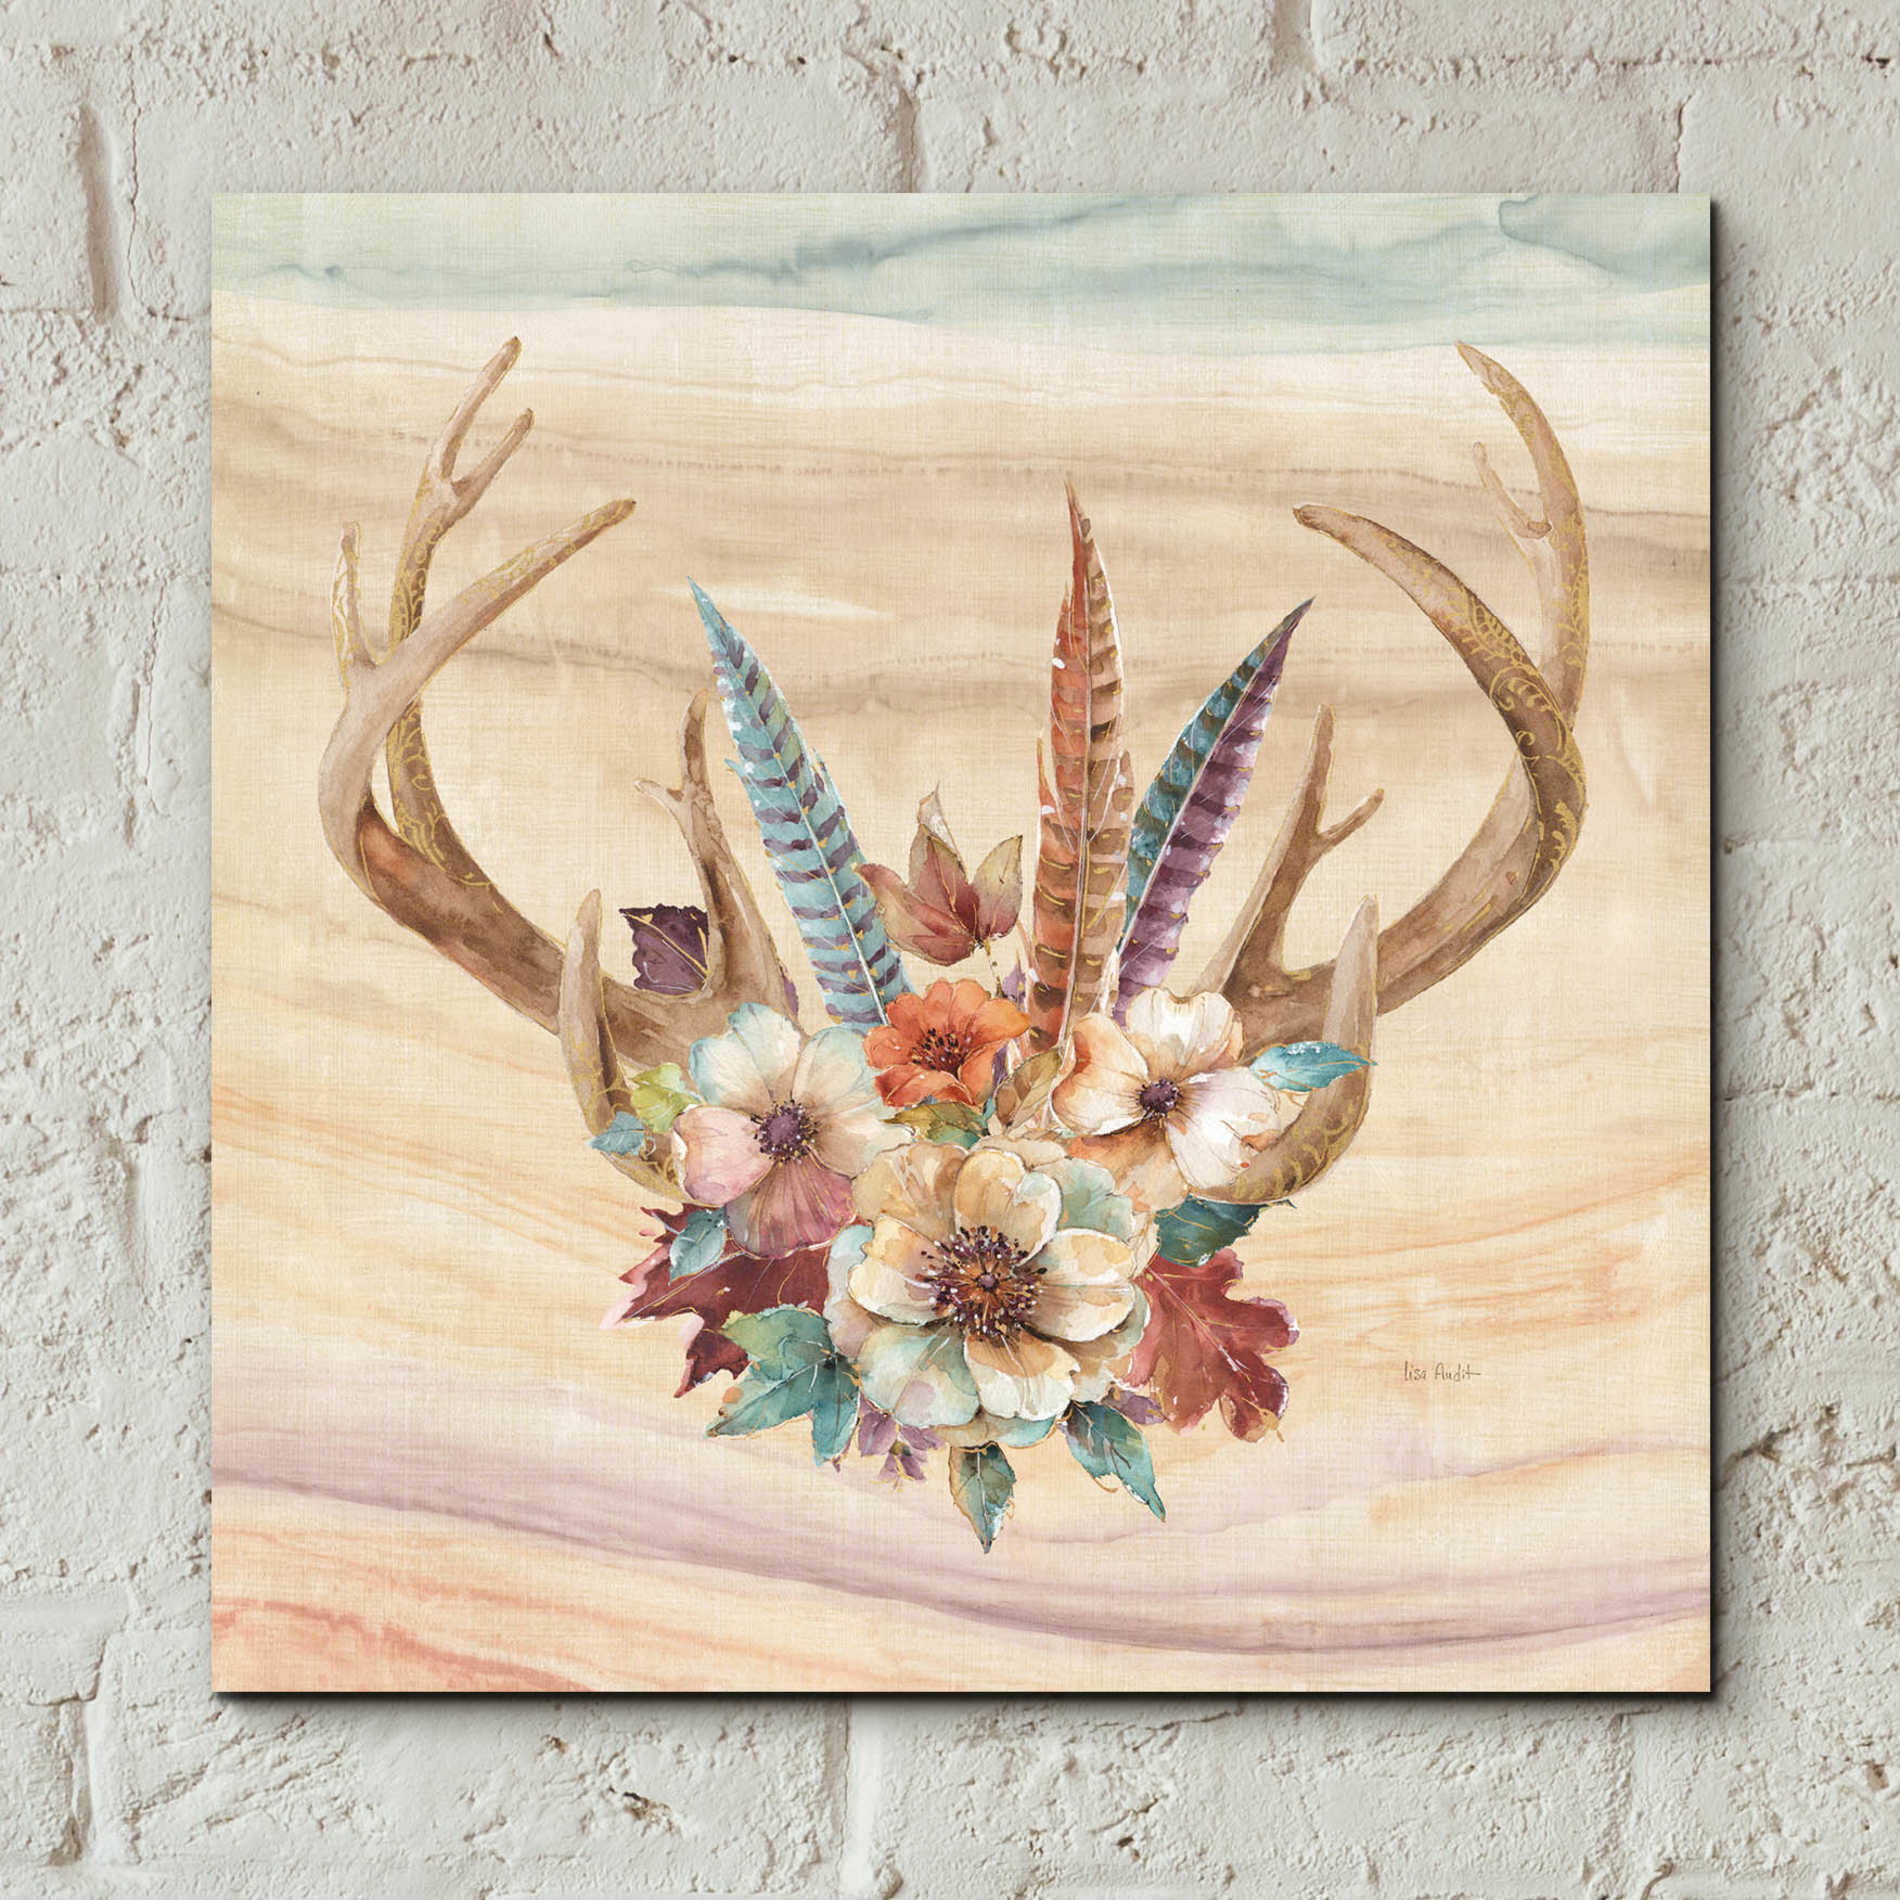 Epic Art 'Spiced Nature VIII' by Lisa Audit, Acrylic Glass Wall Art,12x12